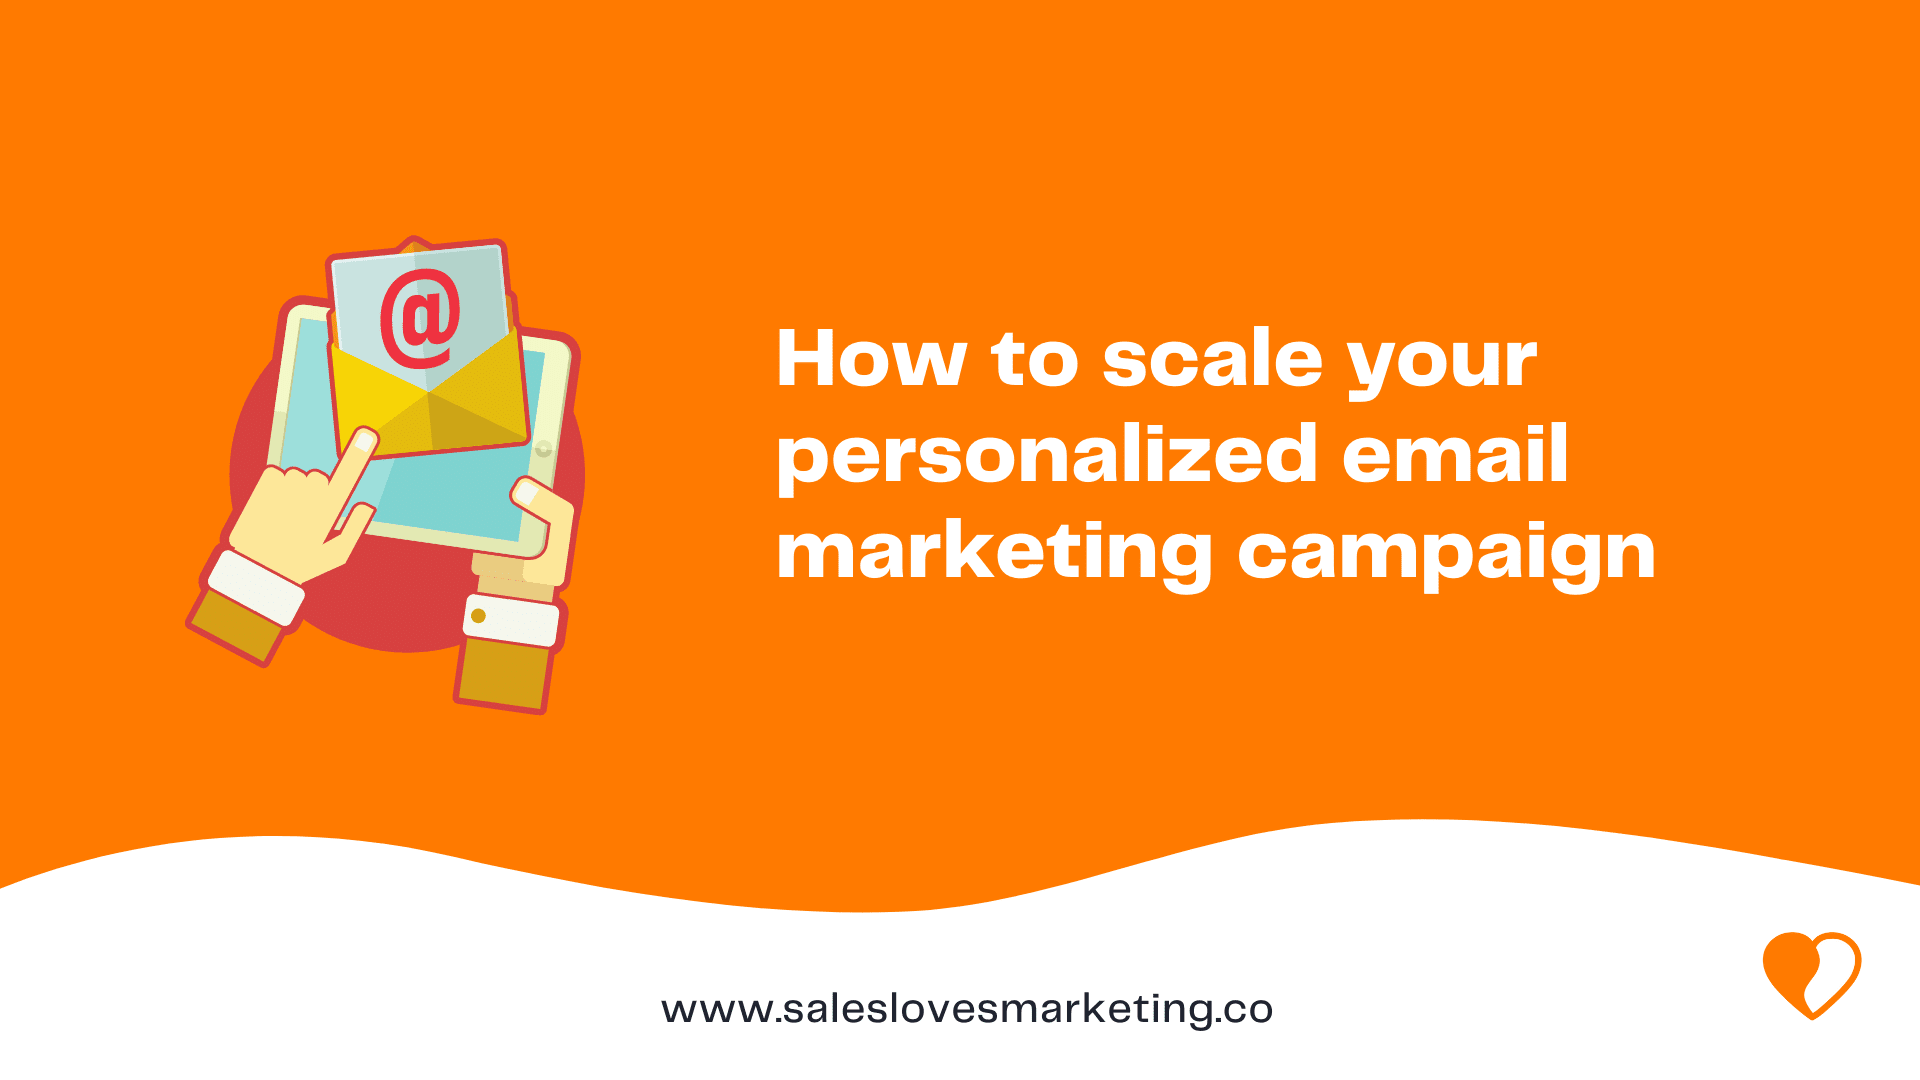 How To Scale Your Personalized Email Marketing Campaign